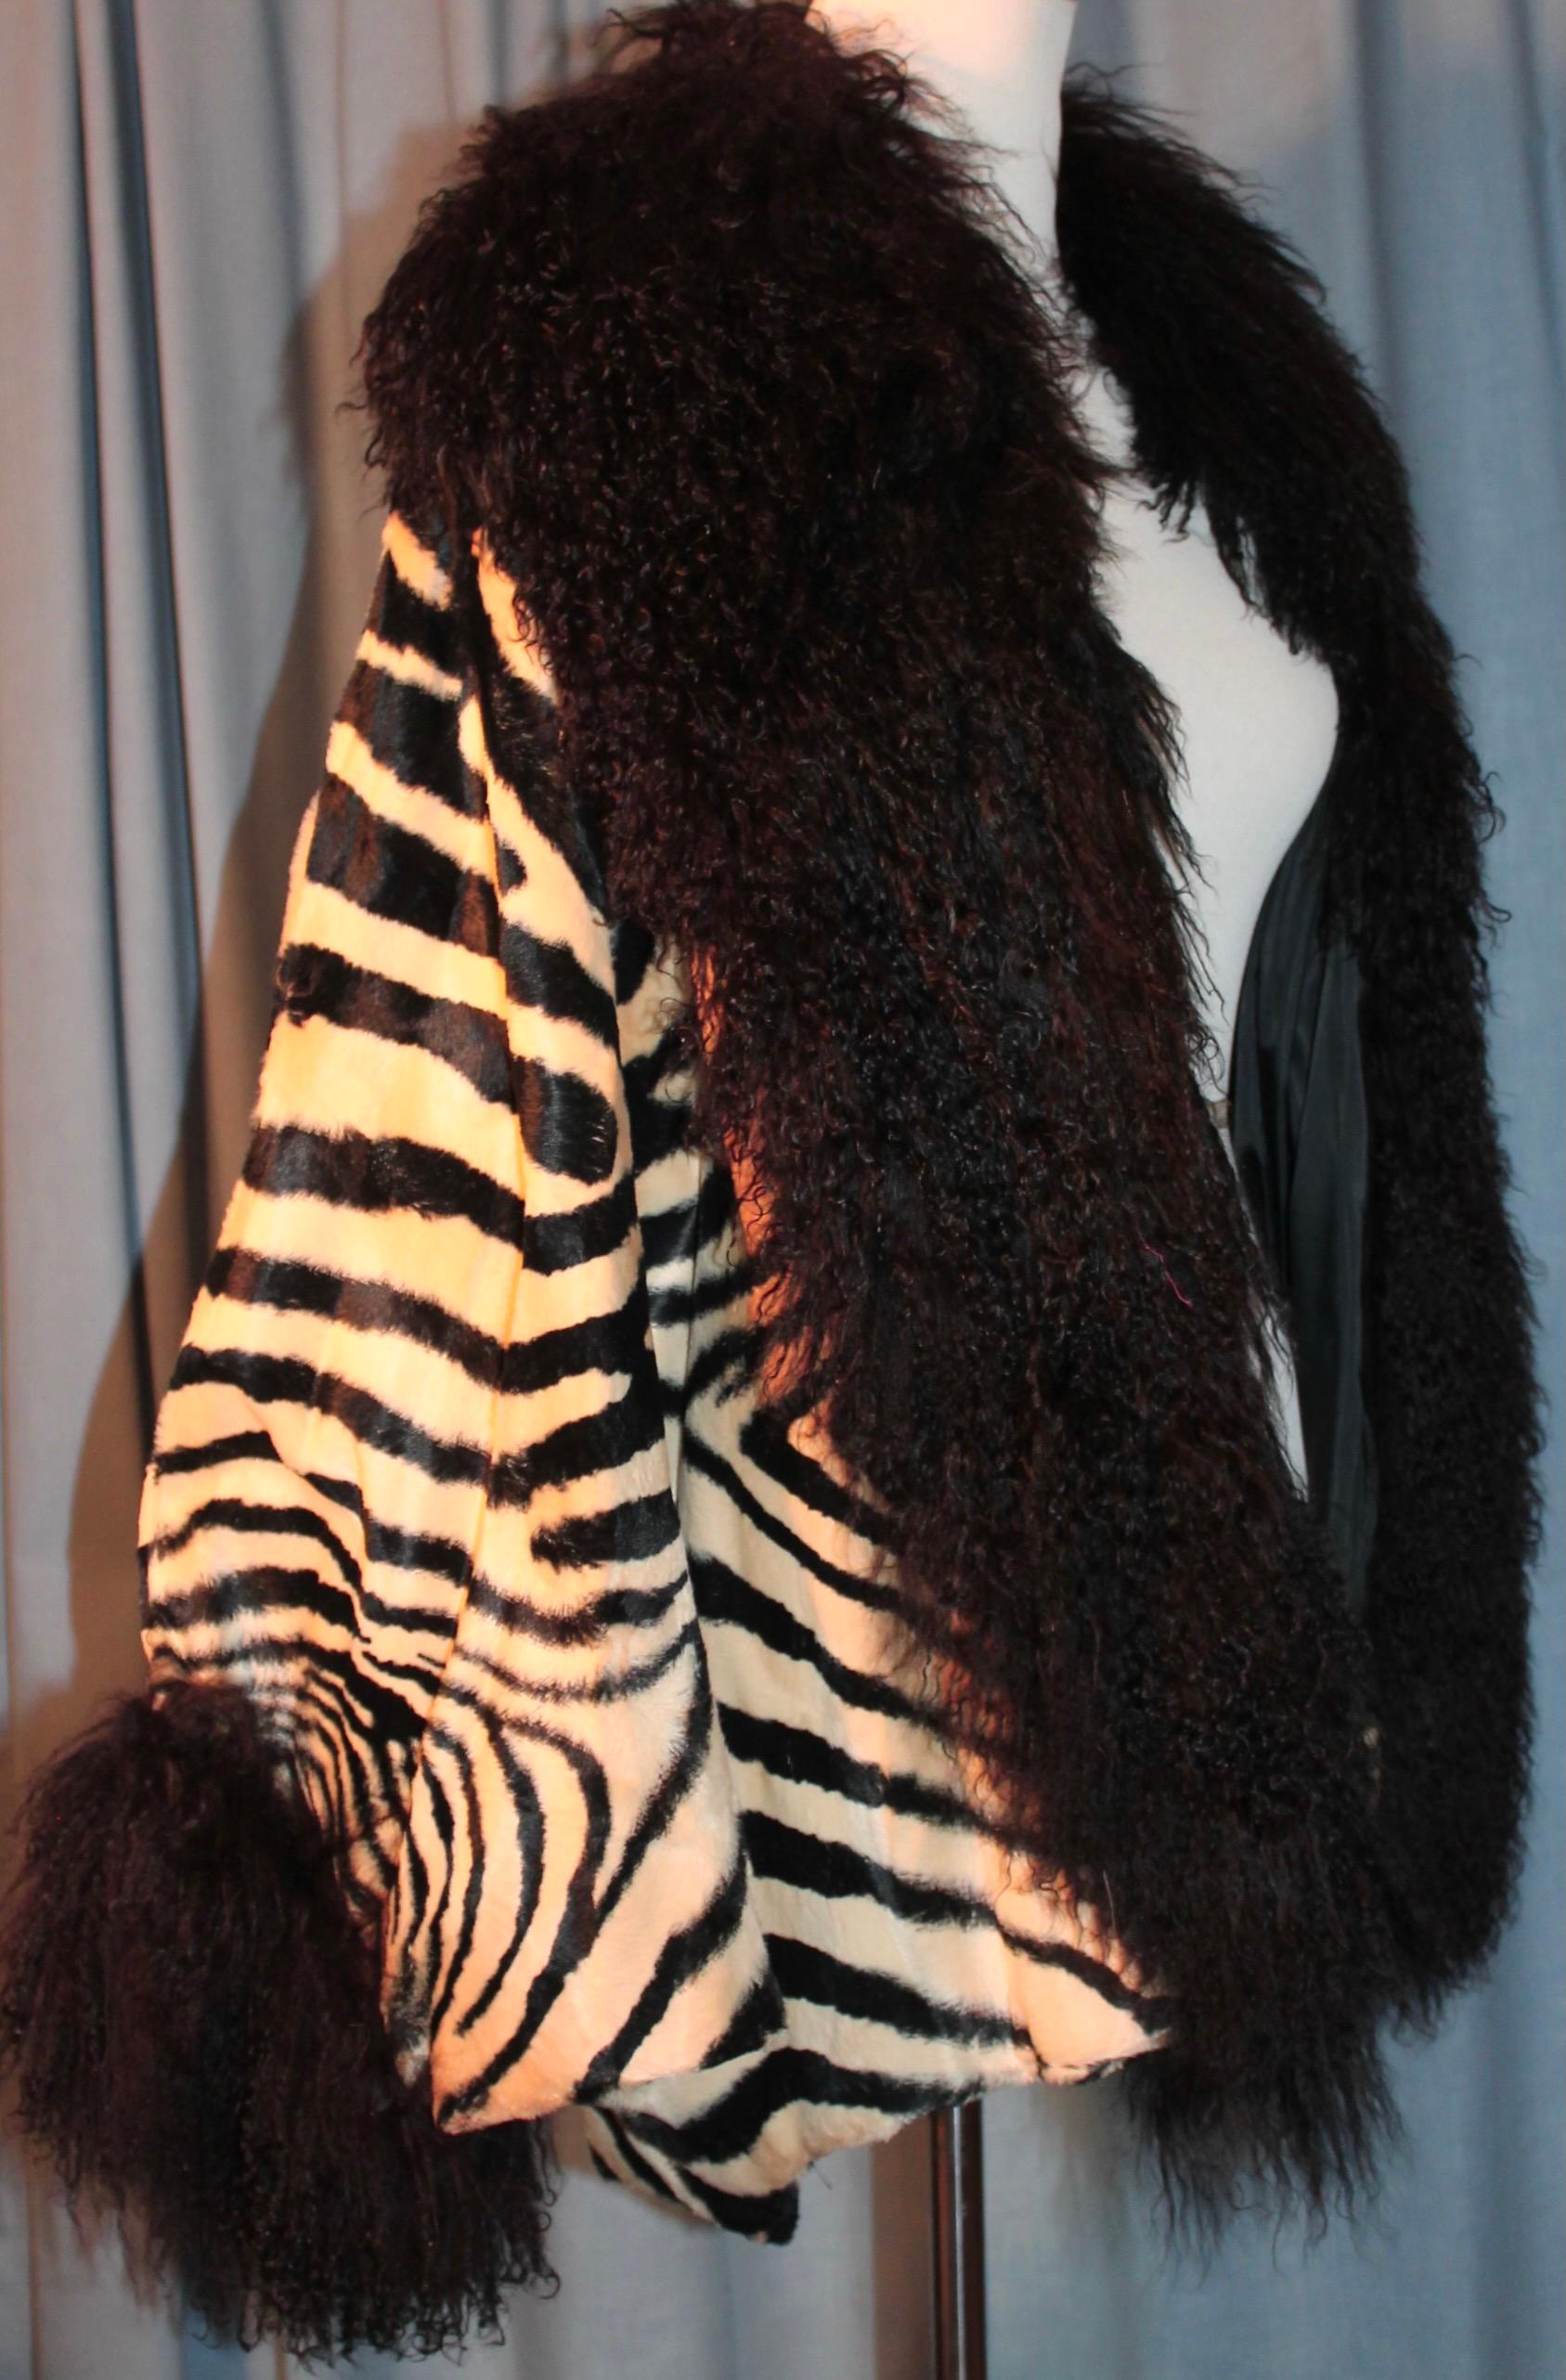 Offering a spectacular Adrienne Landau for Elizabeth Arden Salon, Faux Zebra trimmed with black curly Mongolian Lamp, collar and cuffs. Jacket.  Appear unworn, with original price tag attached.